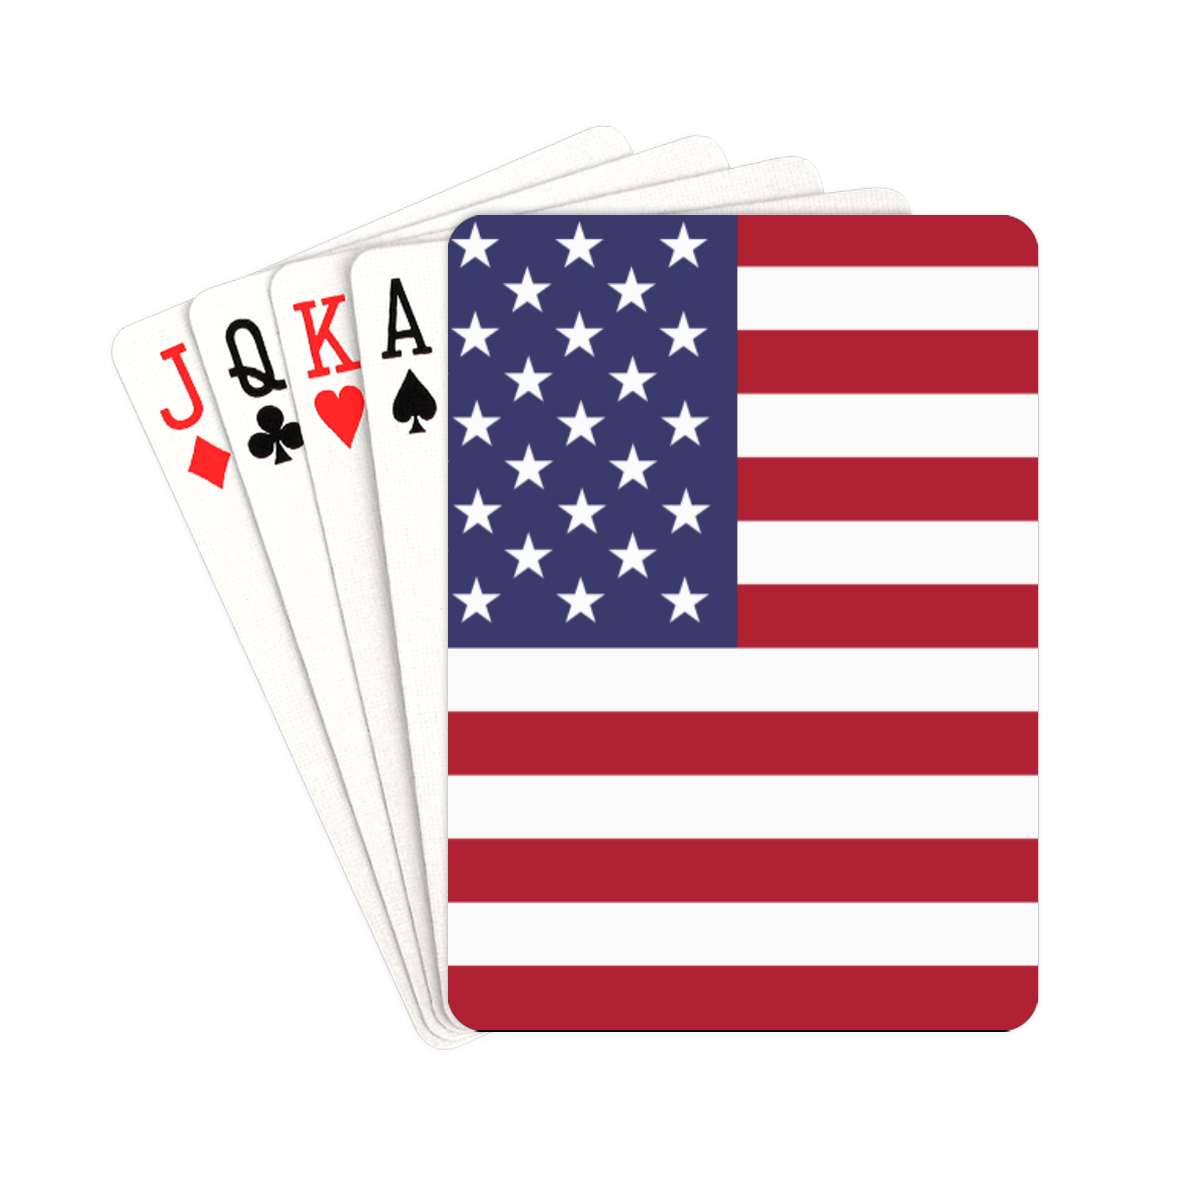 United States of America flag Playing Cards 2.5"x3.5"